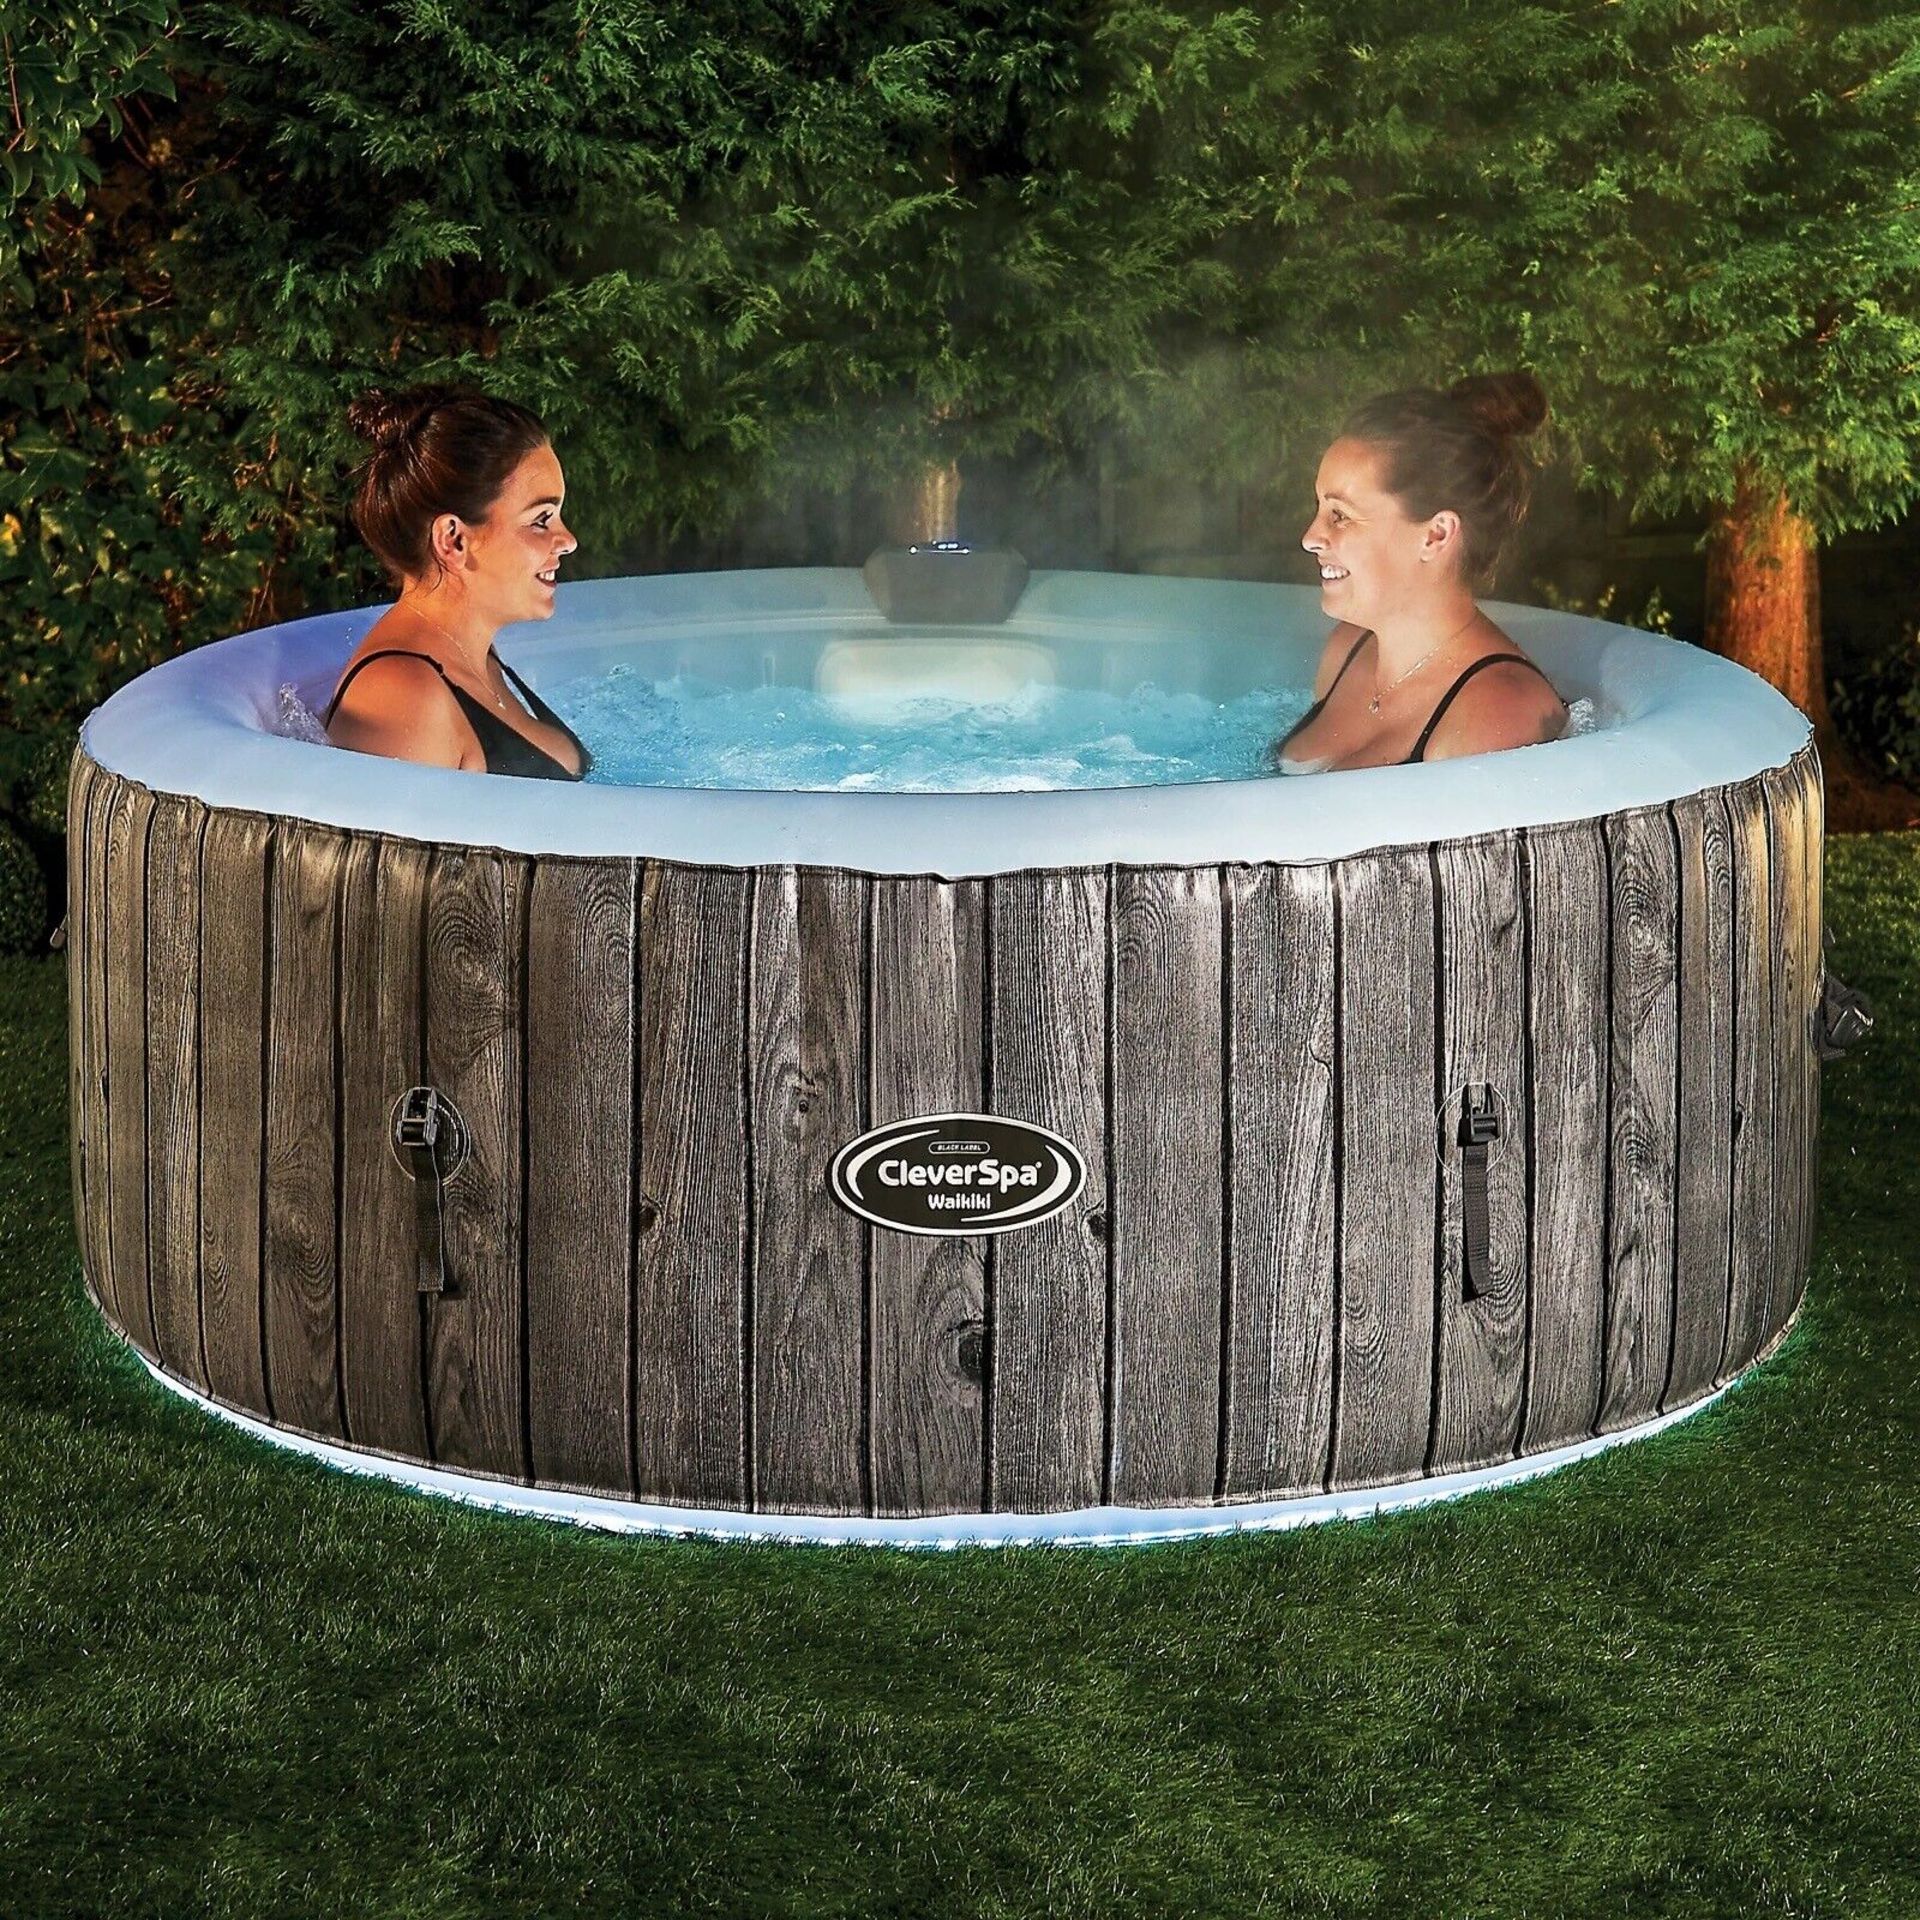 CLEVER SPA HOT TUB WITH LIGHTS - ORIGINAL PACKING, CUSTOMER RETURN - Image 2 of 3